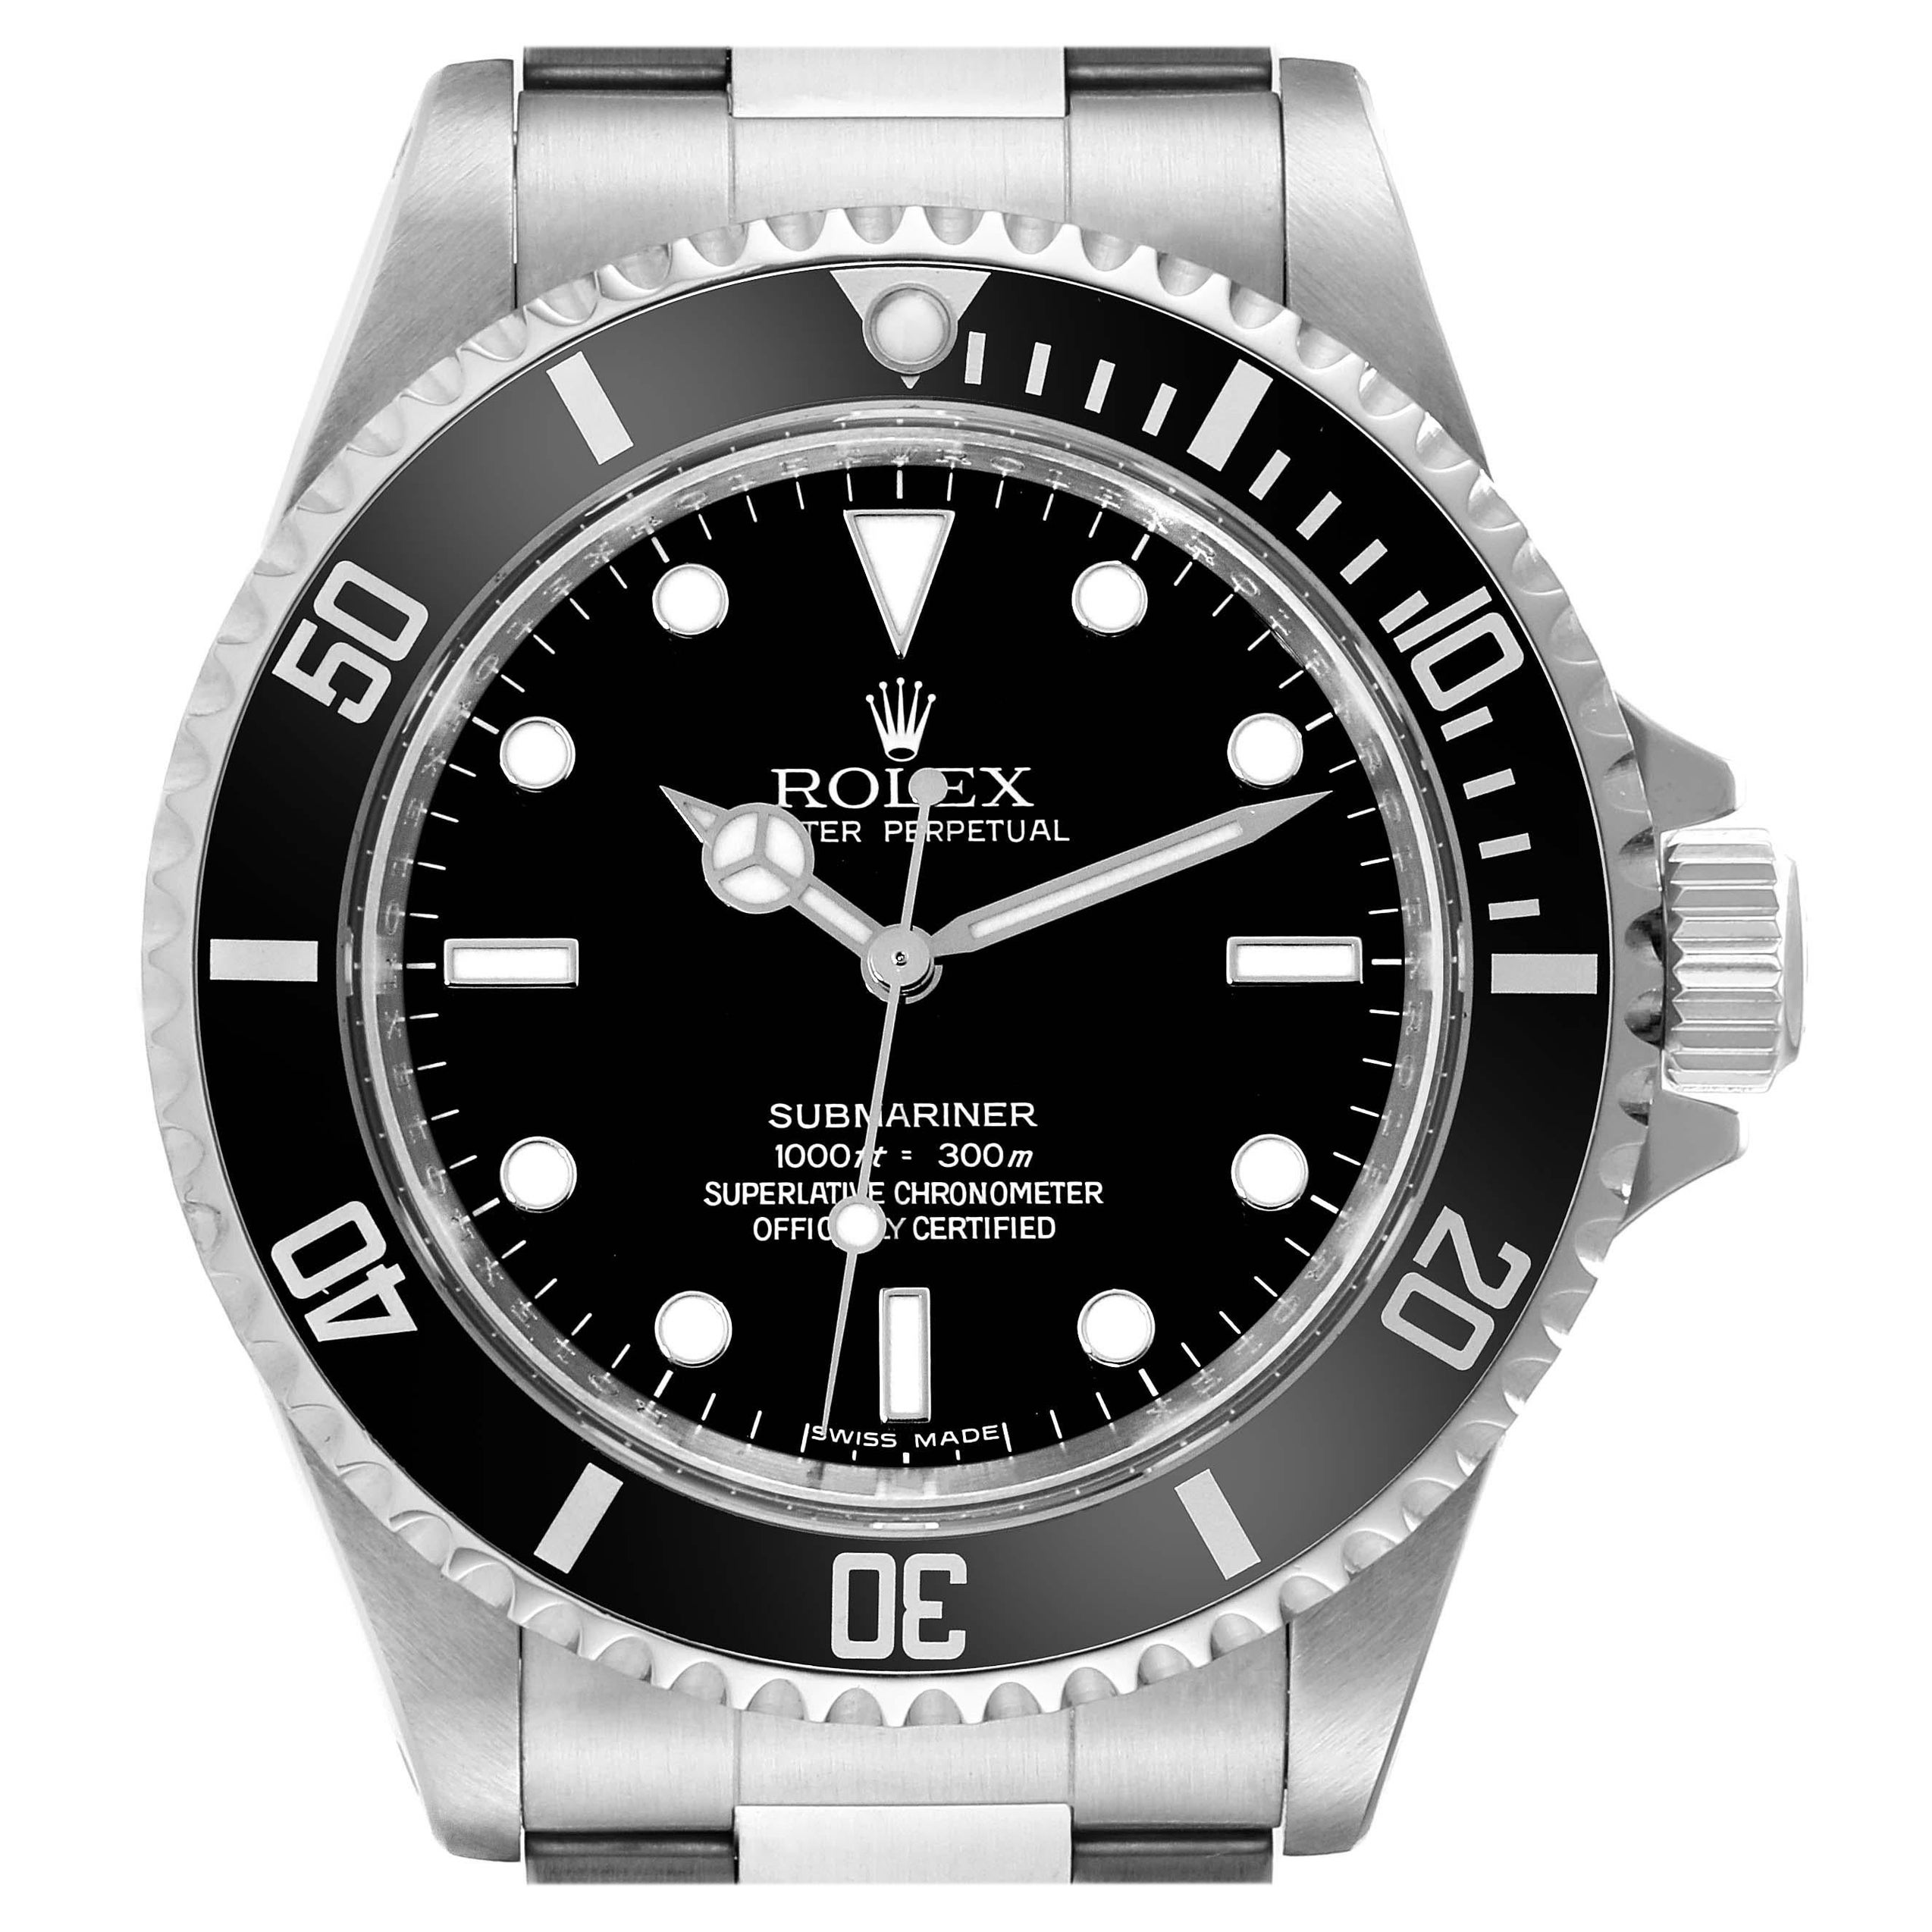 Do all Rolex Submariners have a date function?